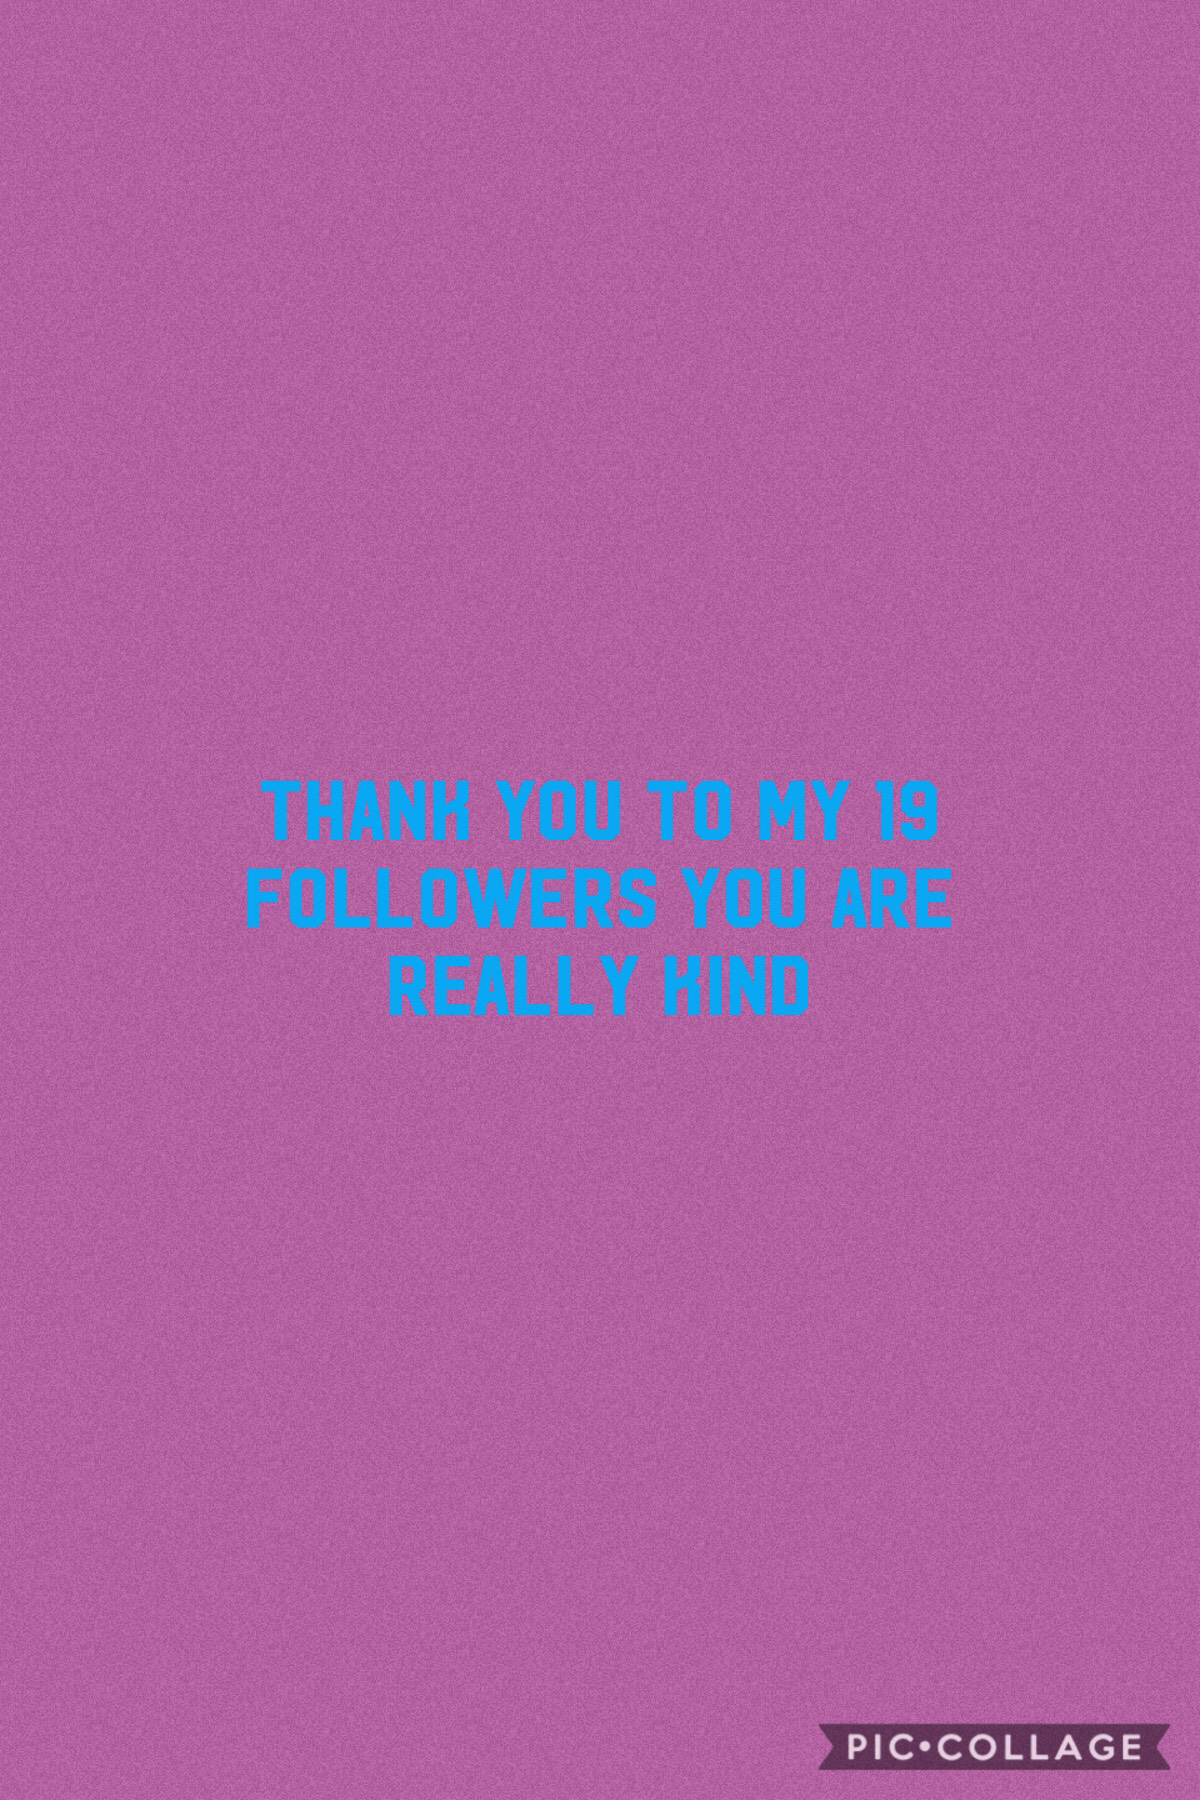 Thank you everyone you’re also nice kind sweet thank you so much for following